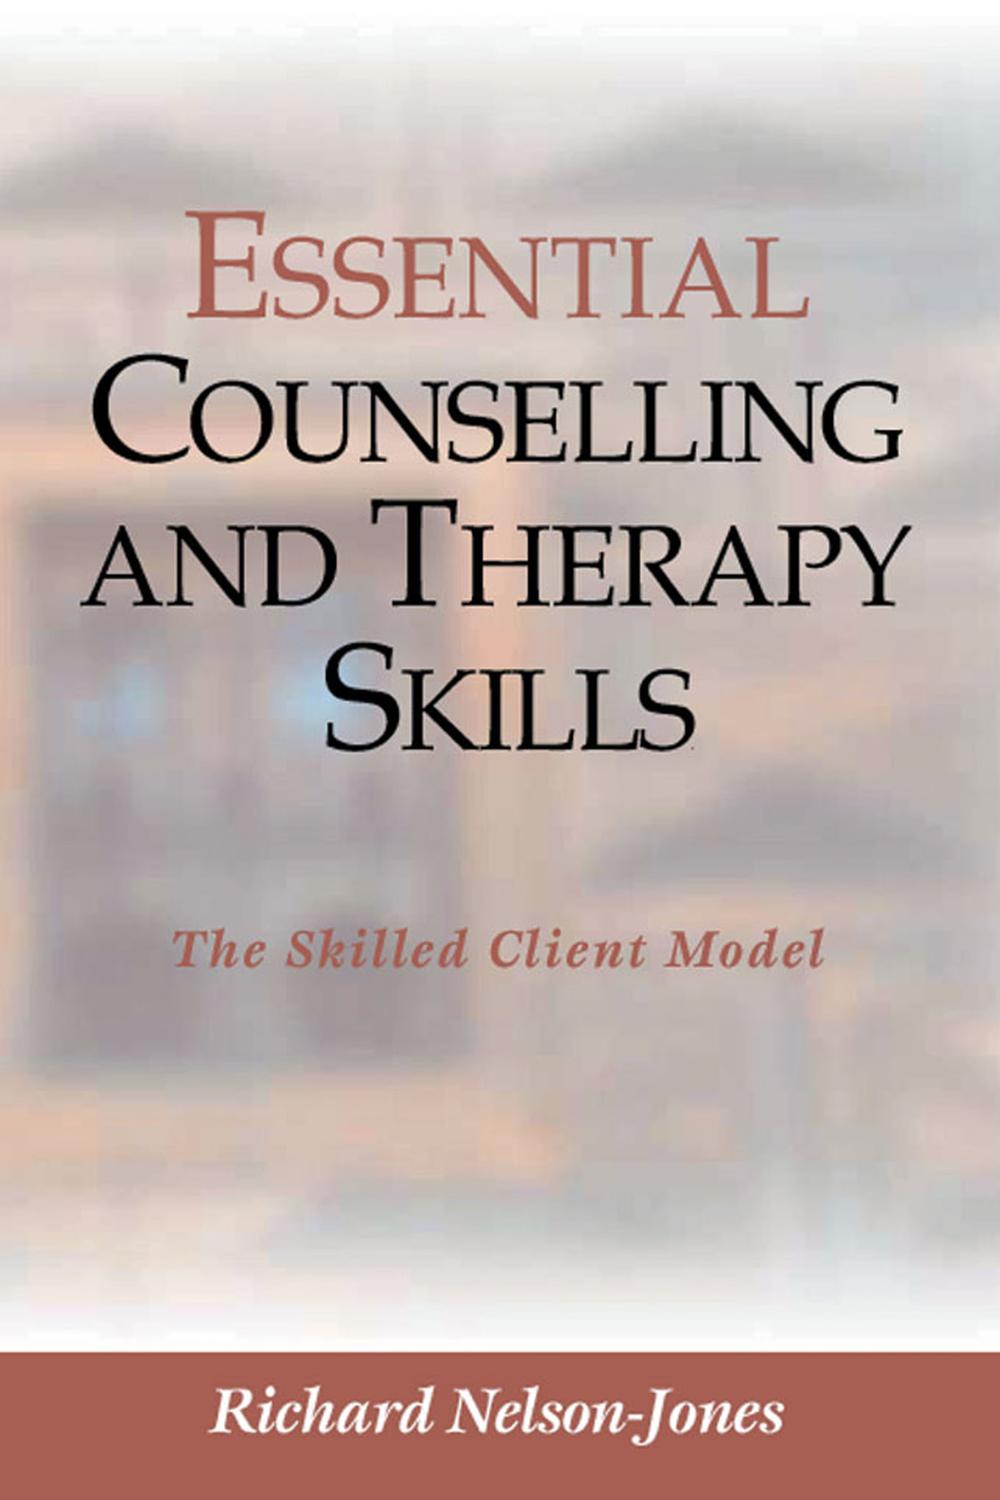 Essential Counselling and Therapy Skills - Richard Nelson-Jones